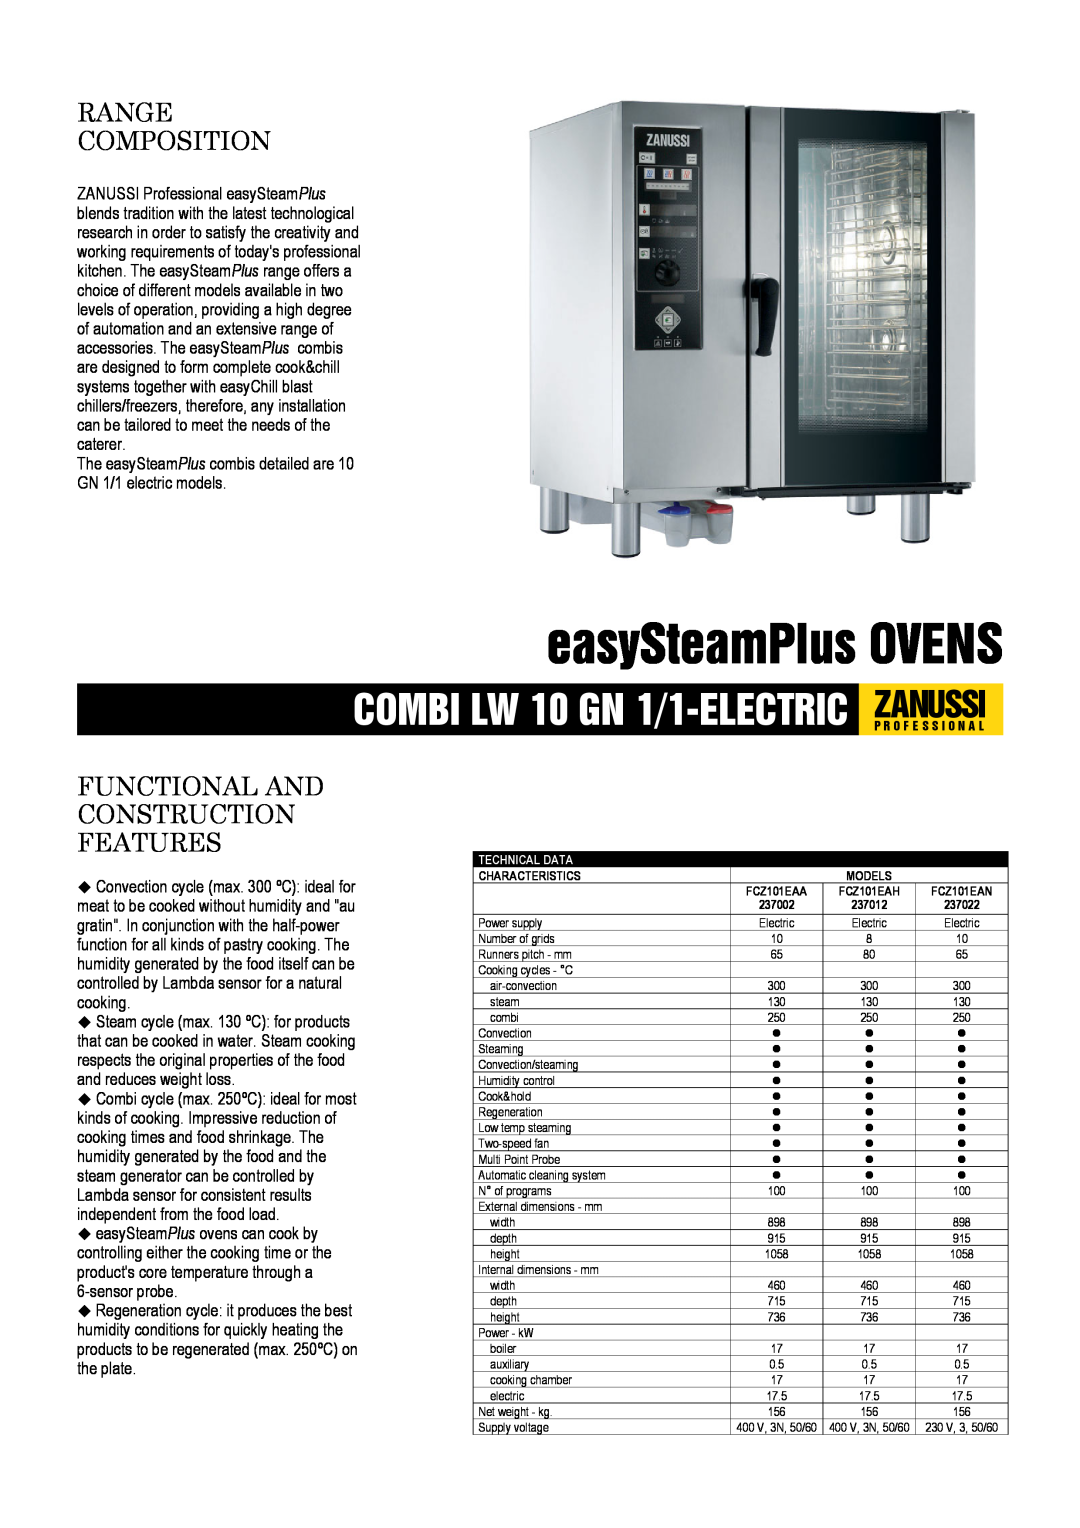 Zanussi 237022, 237012, 237002 dimensions easySteamPlus OVENS, Range Composition, Functional And Construction Features 